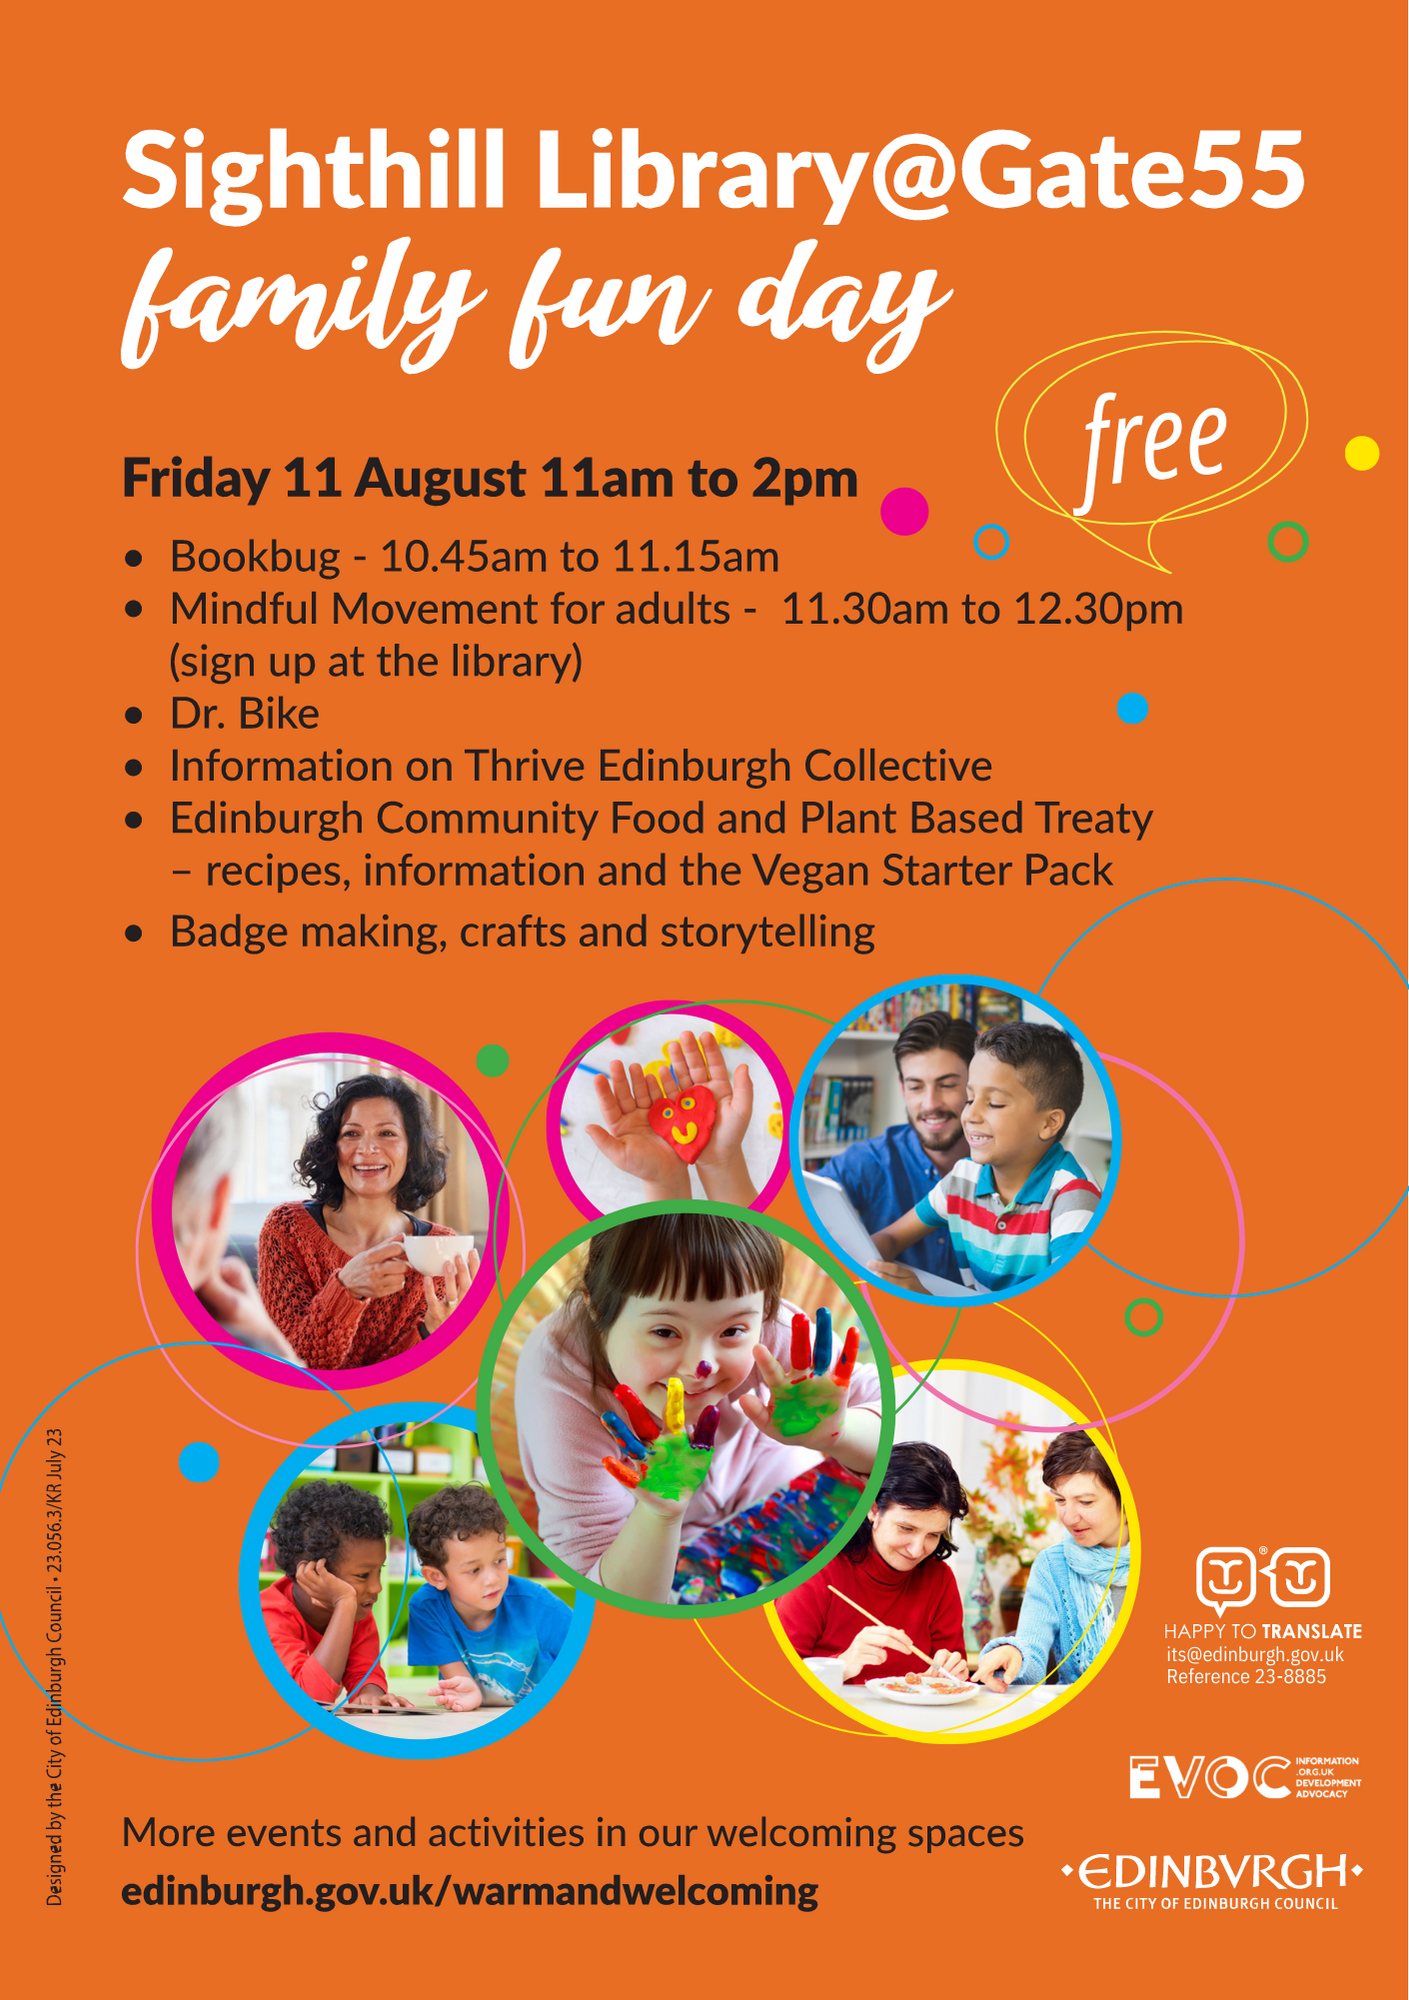 sighthill library gate 55 family fun day